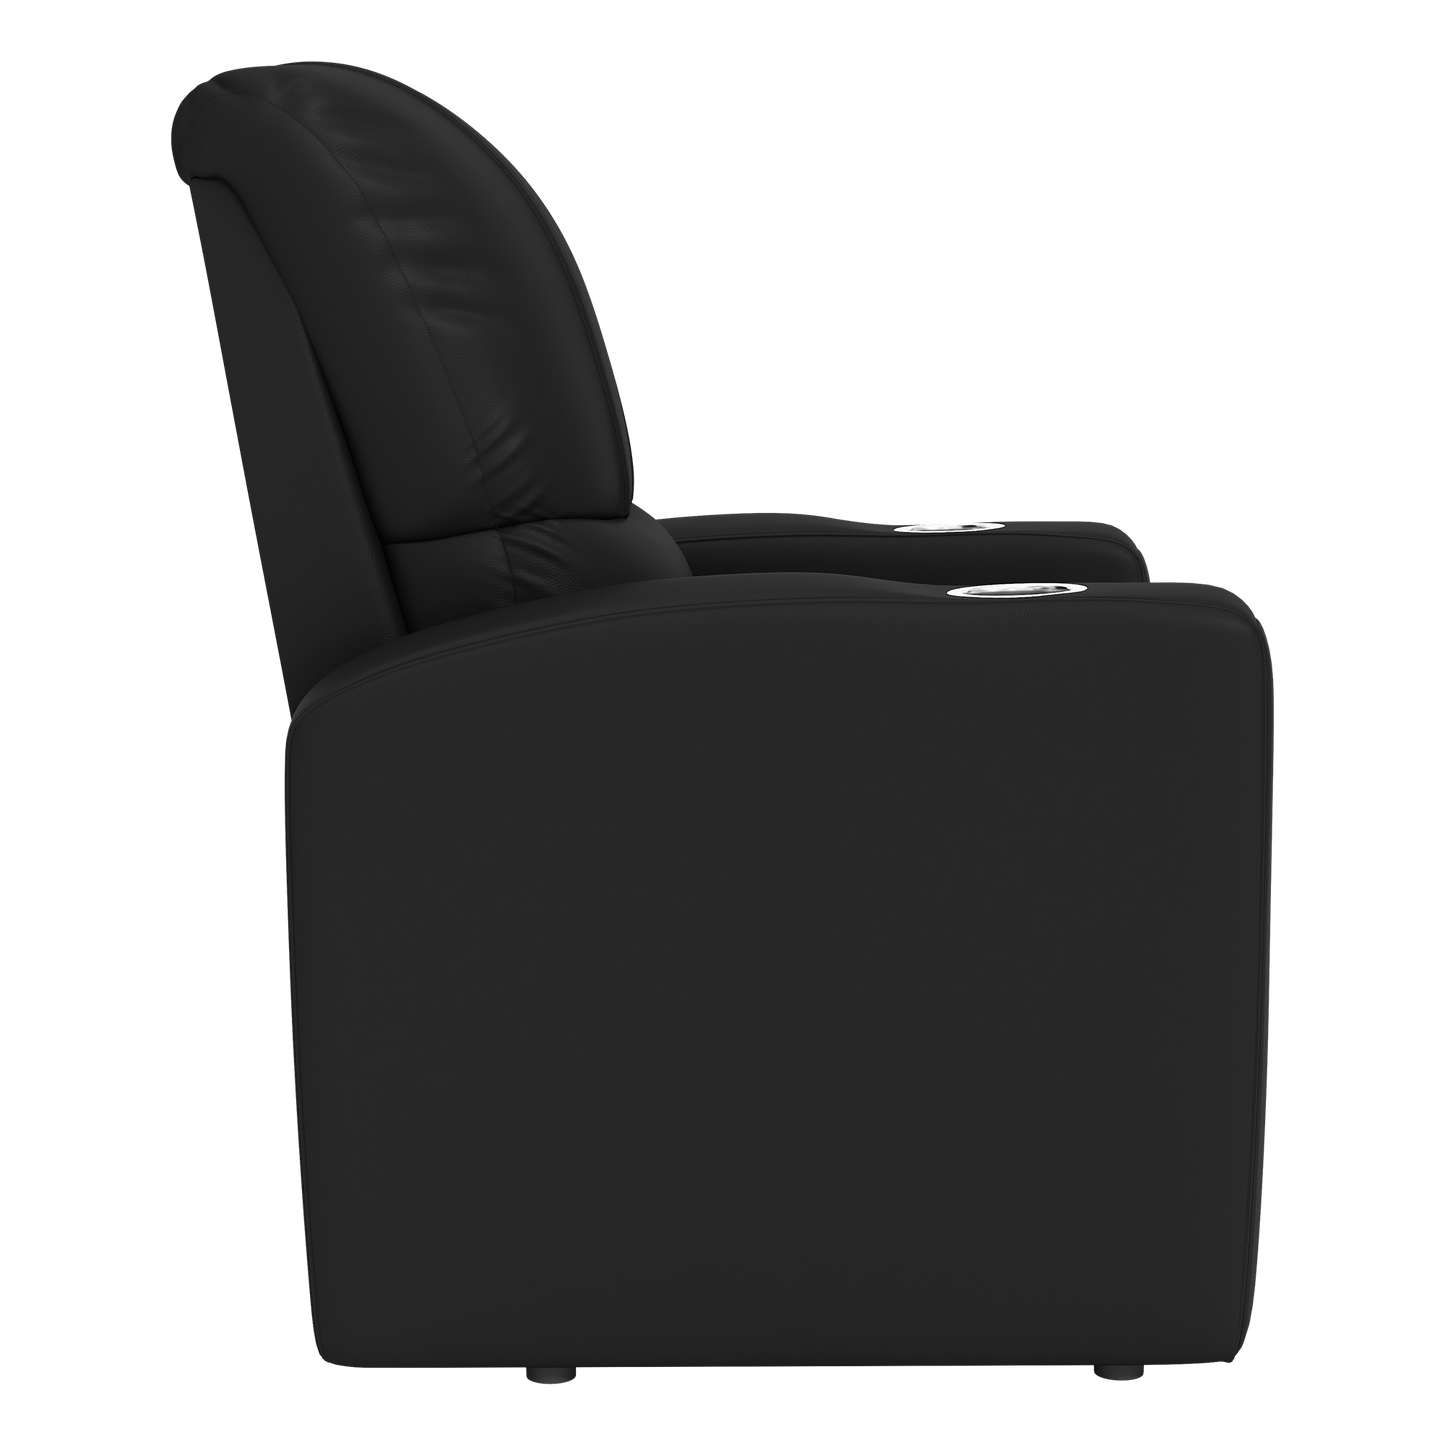 Stealth Recliner with  San Francisco 49ers Primary Logo